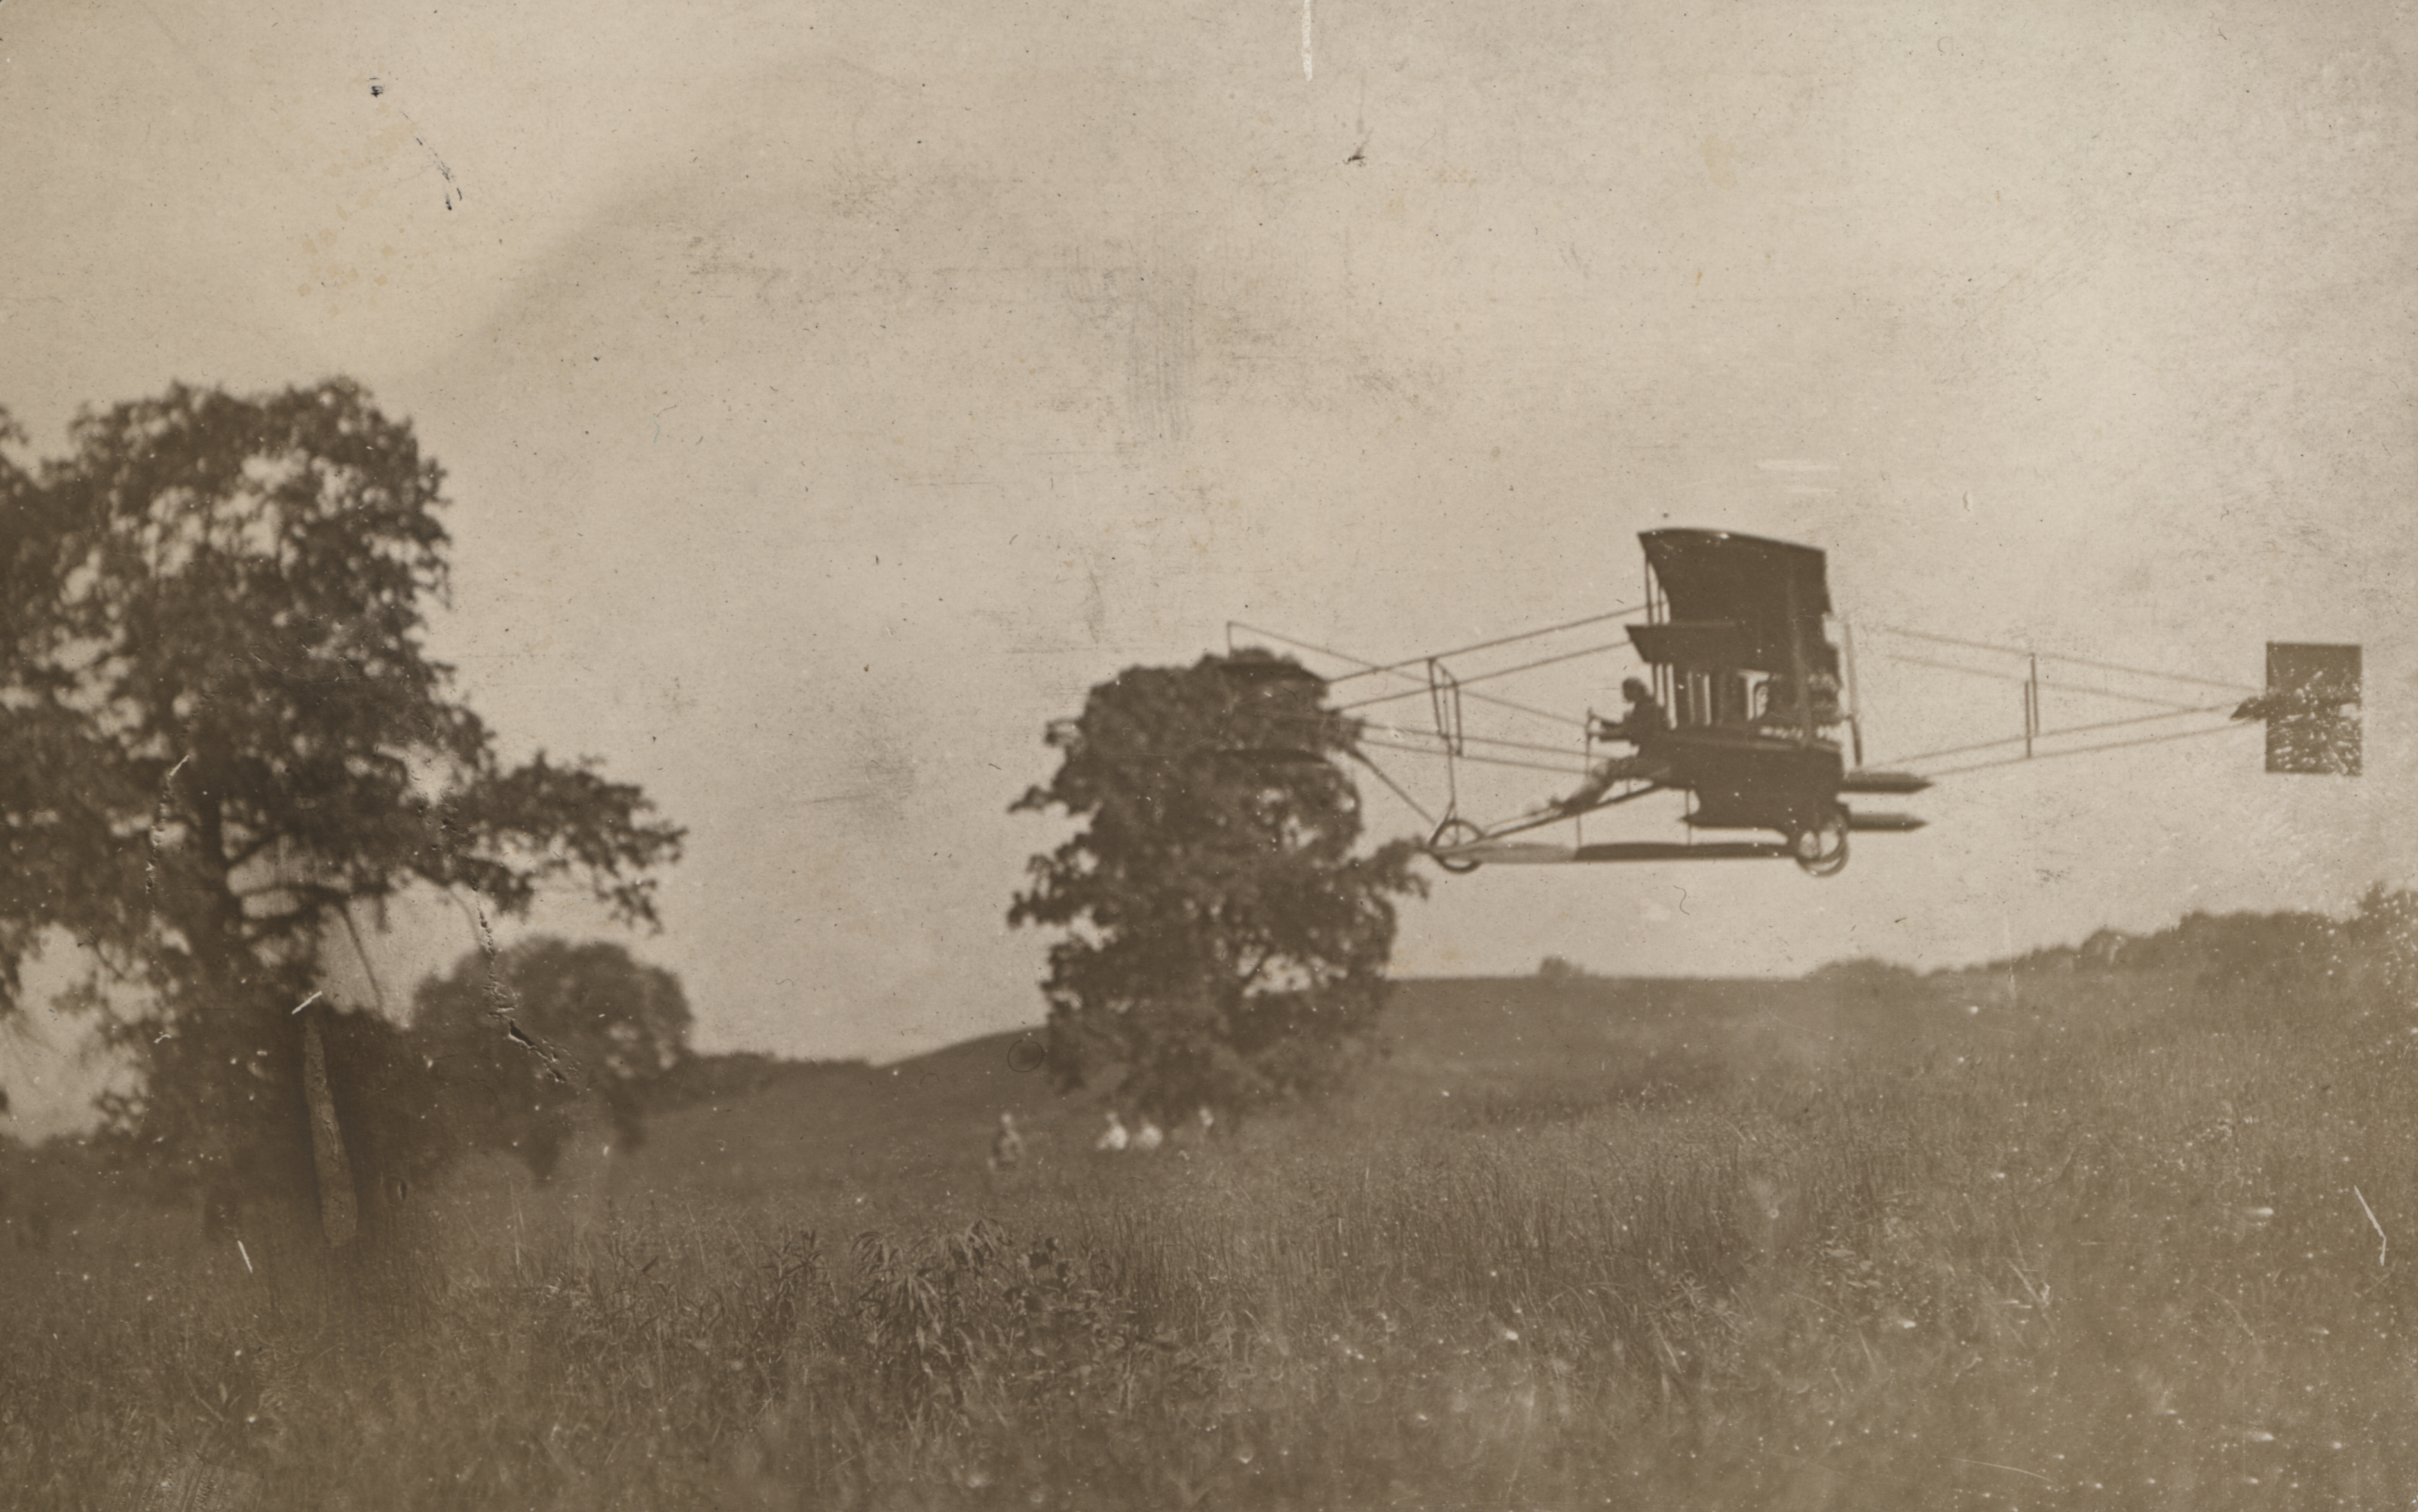 Sepia-toned photograph of Glenn Curtiss' Hudson Flier, on the ground. LH Collections.